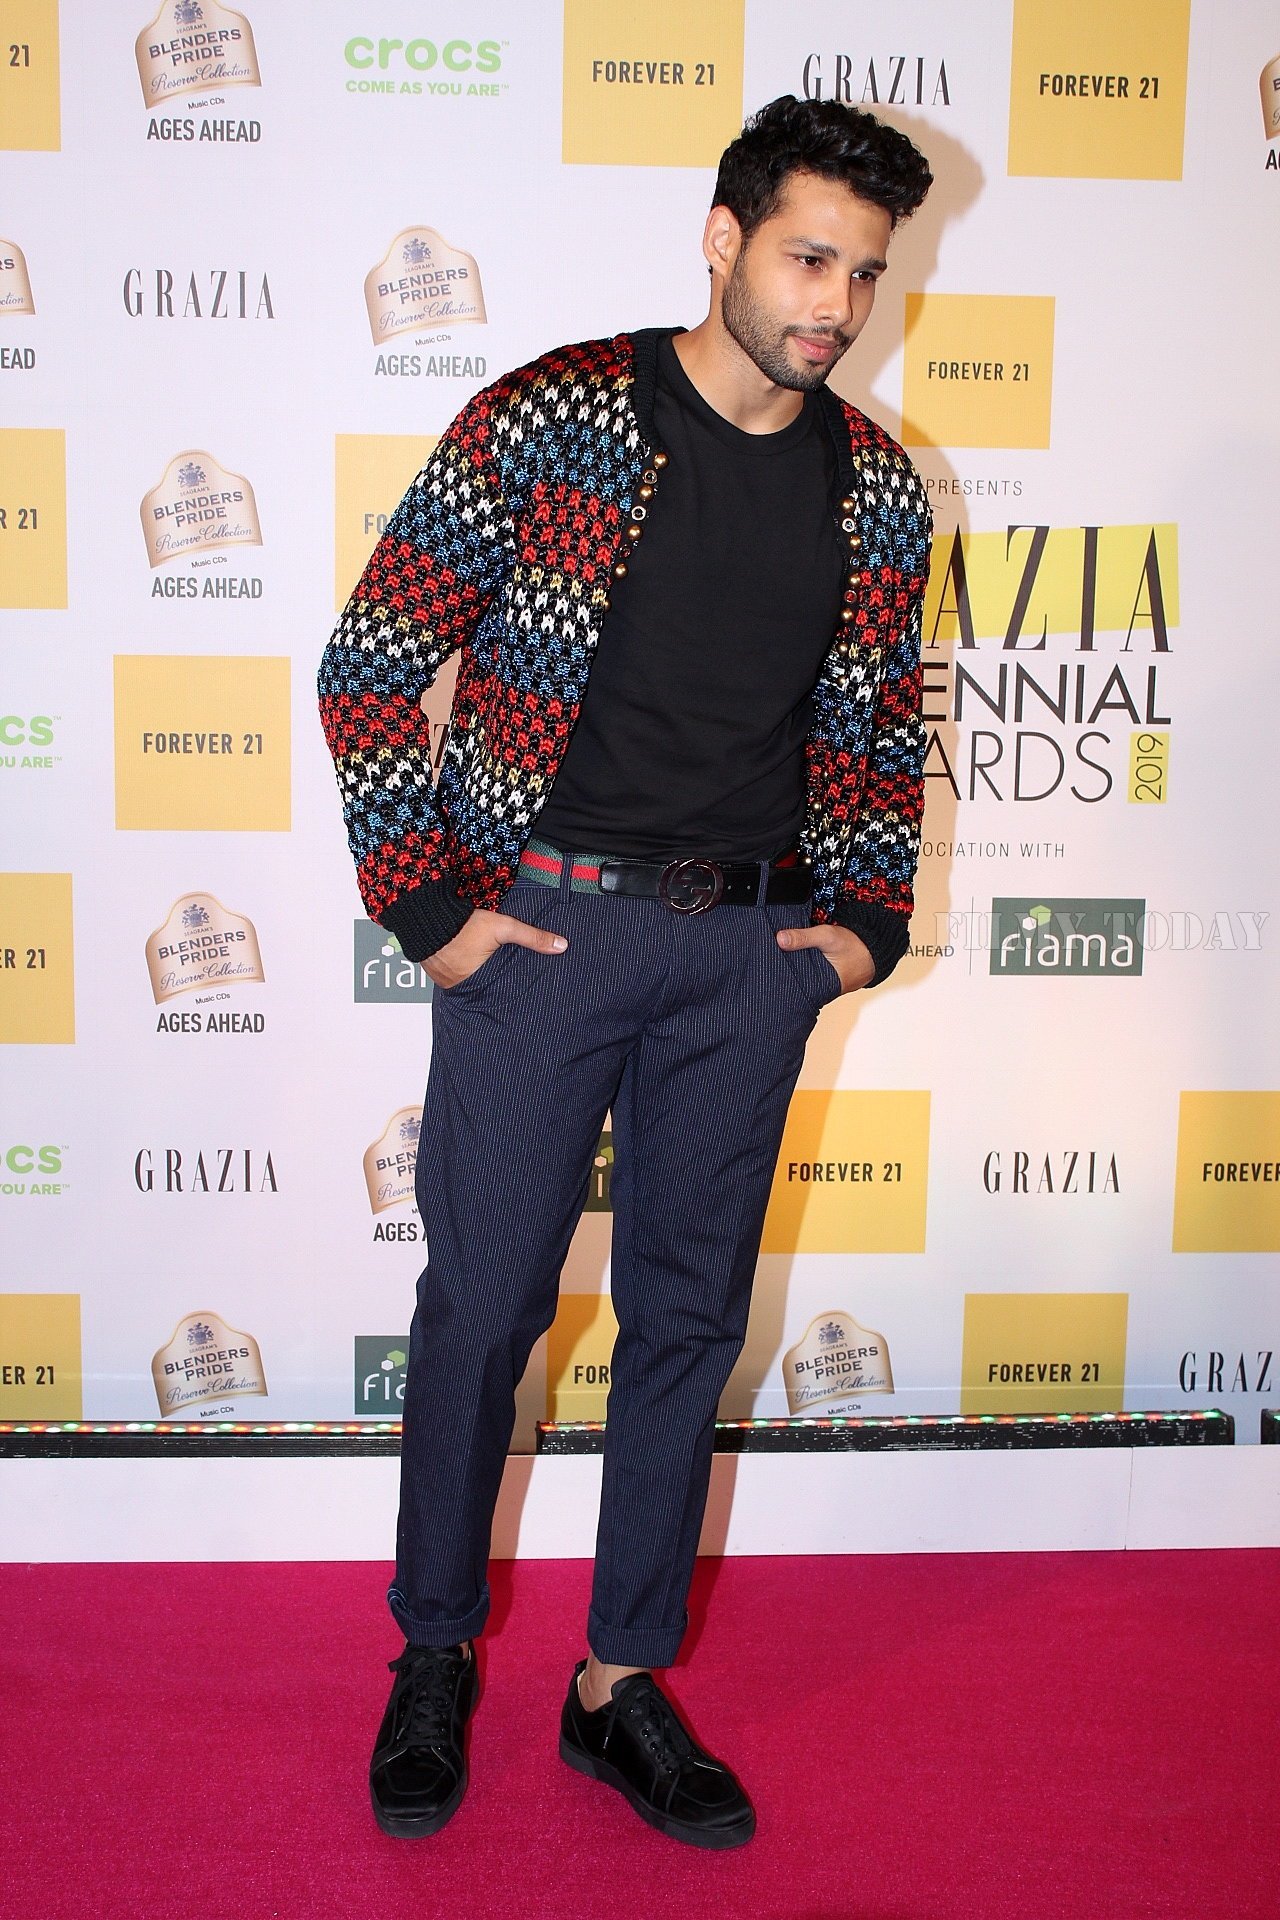 Siddhant Chaturvedi - Photos: Red Carpet Of 1st Edition Of Grazia Millennial Awards 2019 | Picture 1655393